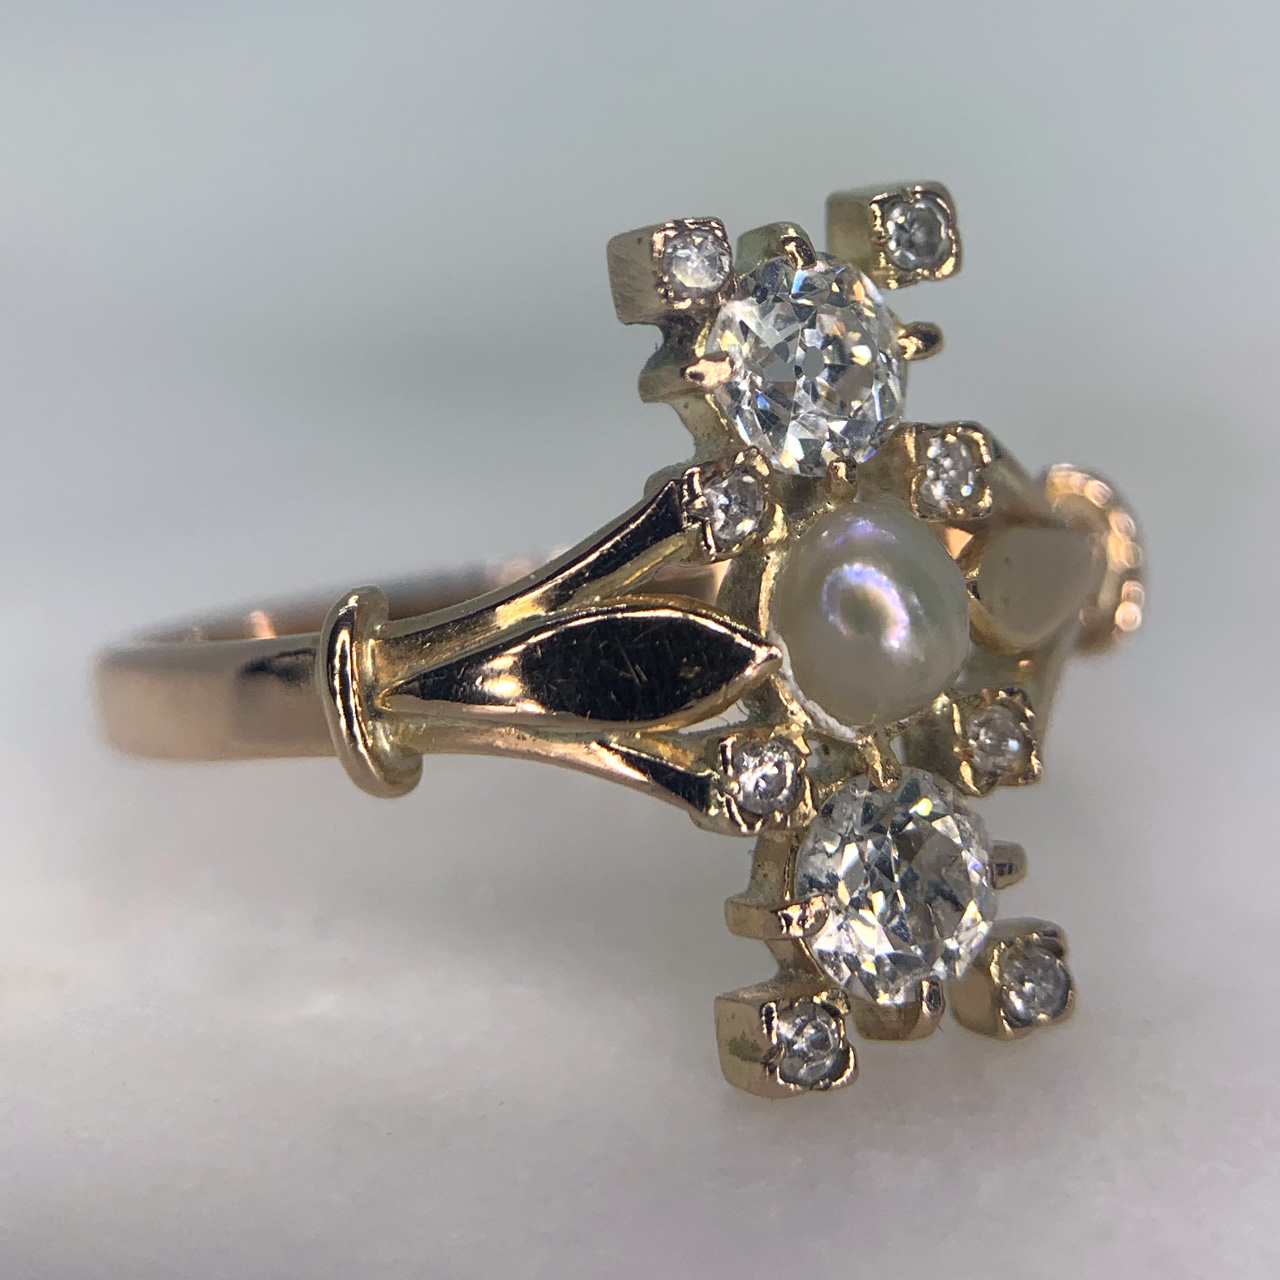 Stunning Diamond and Pearl Upfinger Ring. The ring  is decorated with a singular half pearl of 4mm x 3.5mm approximately and two diamonds. Framing the three principle stones is eight micro-diamonds, all the diamonds are claw set. The head of the ring measures approximately 15.25mm x 6.75mm with a split shoulder polished shank. A beautiful and elegant example of an antique ring in excellent condition.